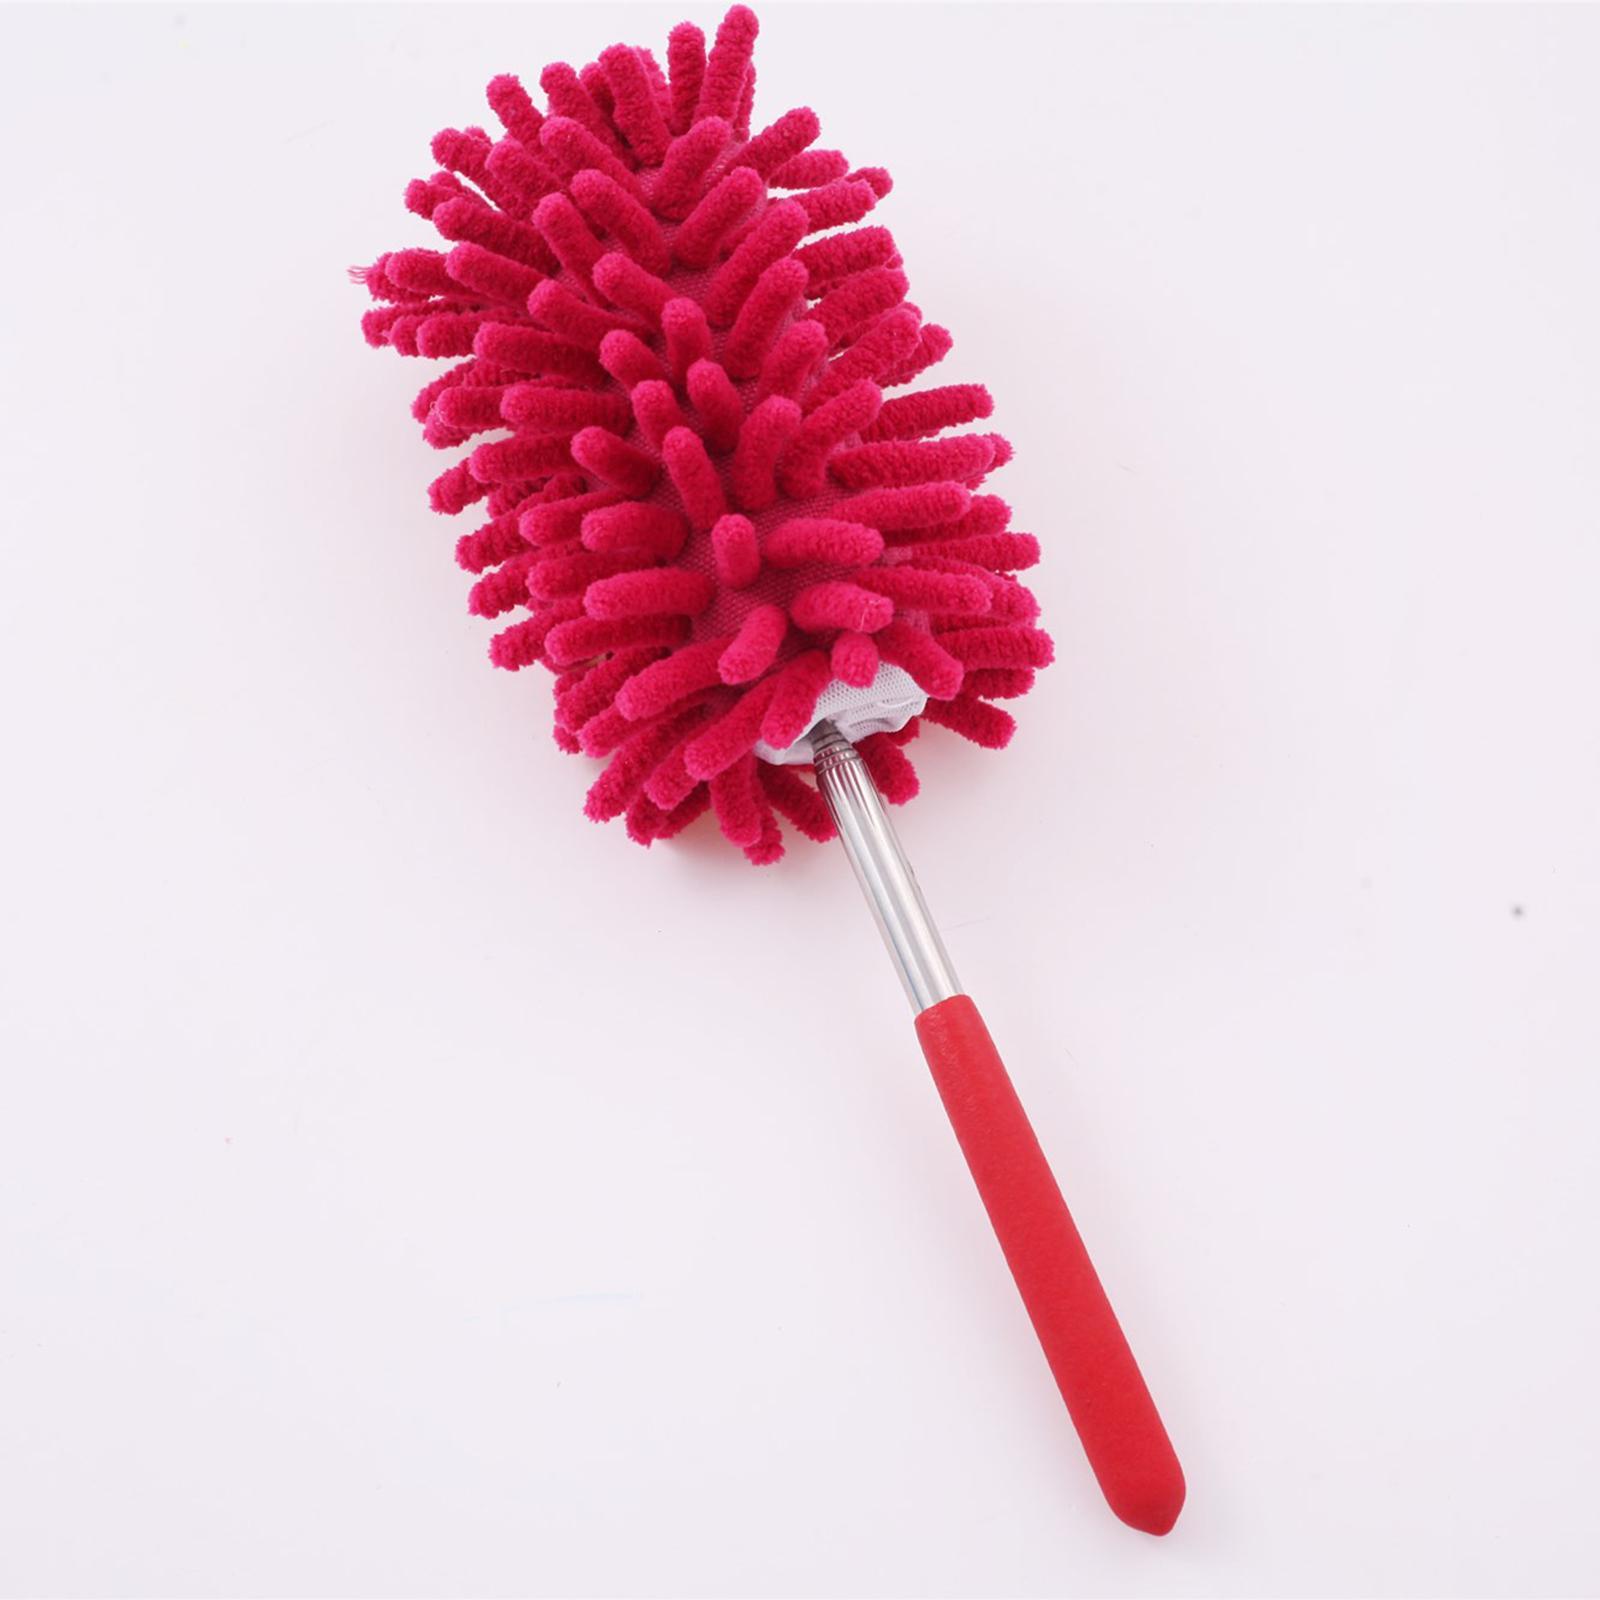 Dust Cleaner Cleaning Tool Housework Cleaning for Kitchen Household Office